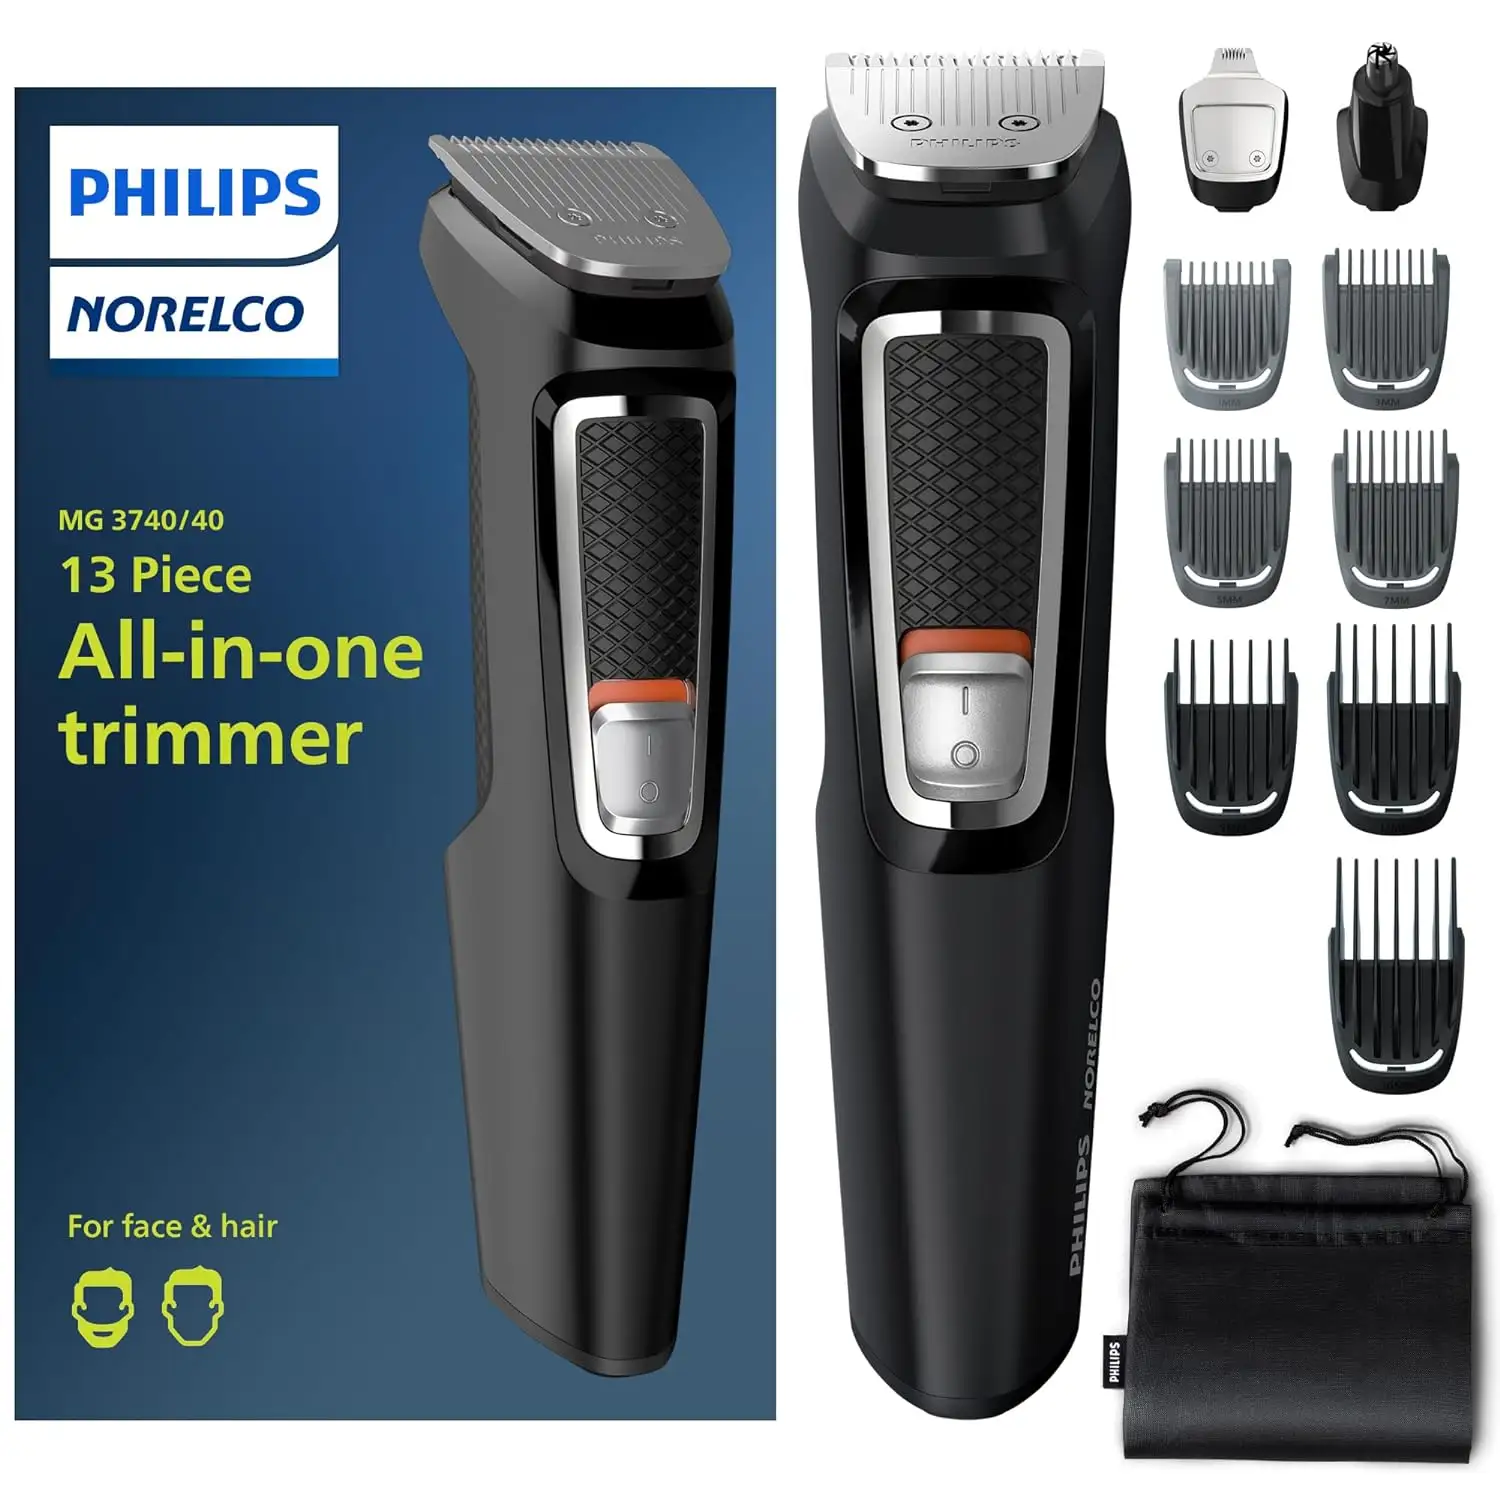 Good Price Norelco Multi Groomer All-in-One Trimmer Series 3000-13 Piece Mens Grooming Kit for Beard, Face,Nose,Ear Hair Trimmer